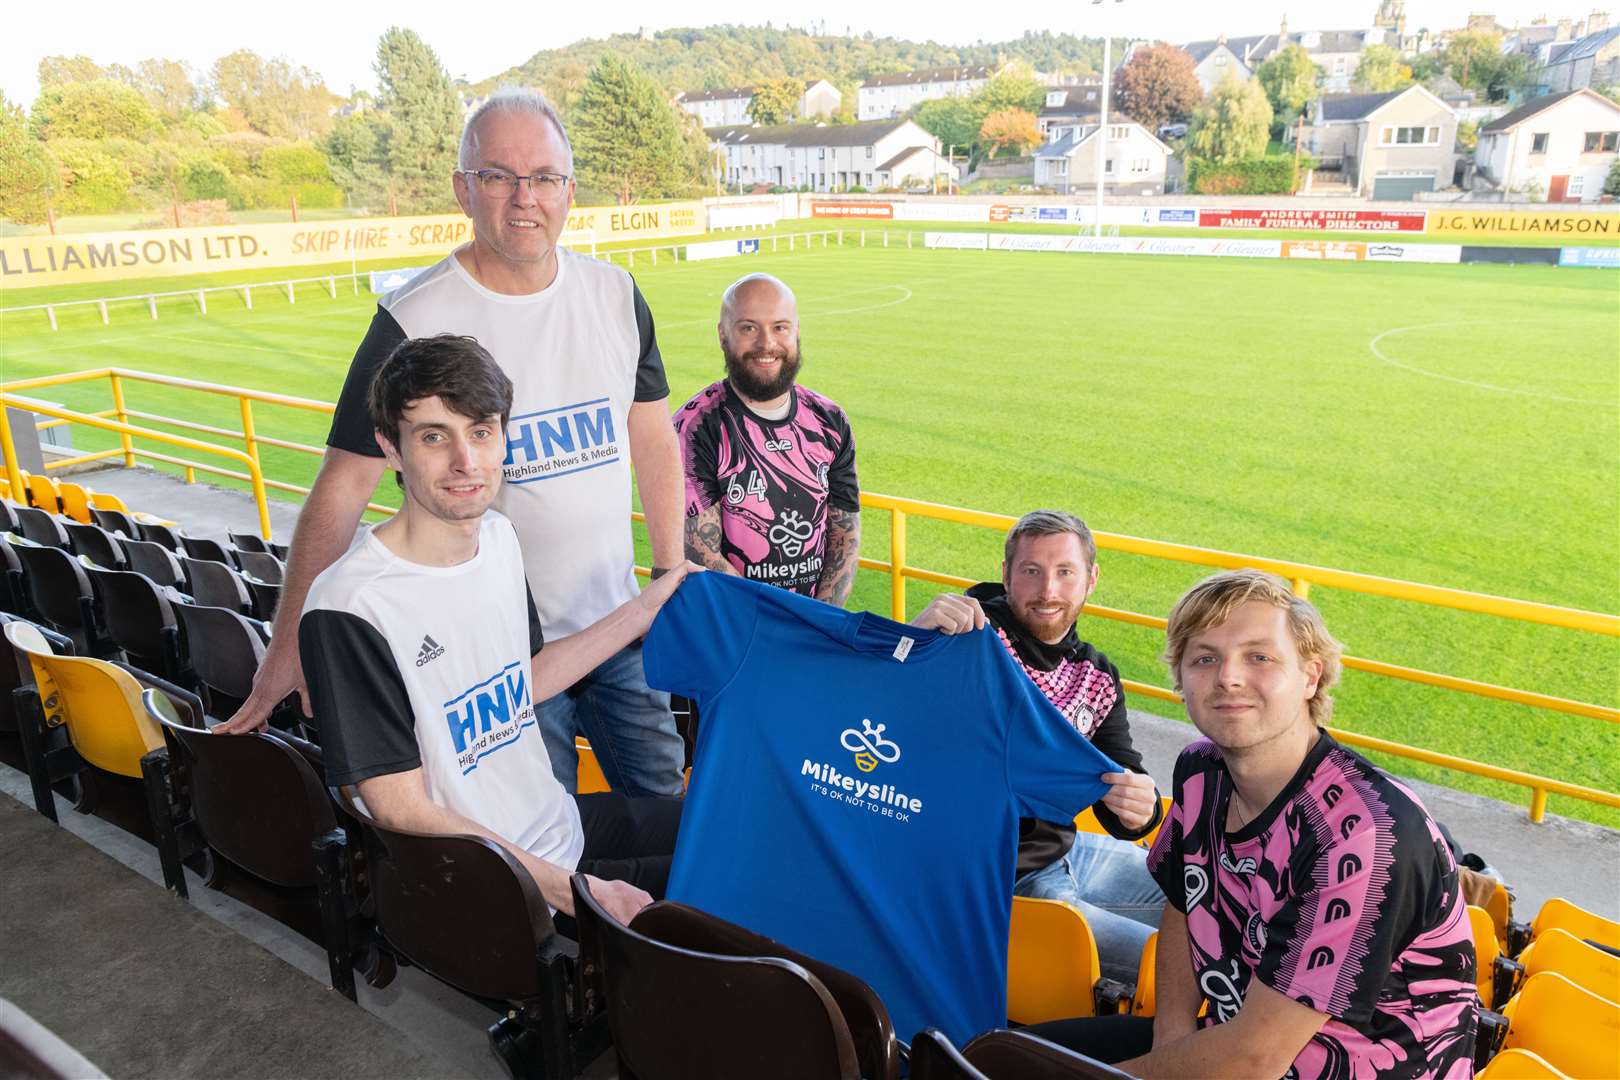 From left: Jonny Clark, Chris Saunderson from The Northern Scot with Matty Slinger, Steven Simpson and Phil Barton from Moray Mental Health Football Club ahead of the Mikeysline Cup charity match at Mosset Park. Picture: Beth Taylor